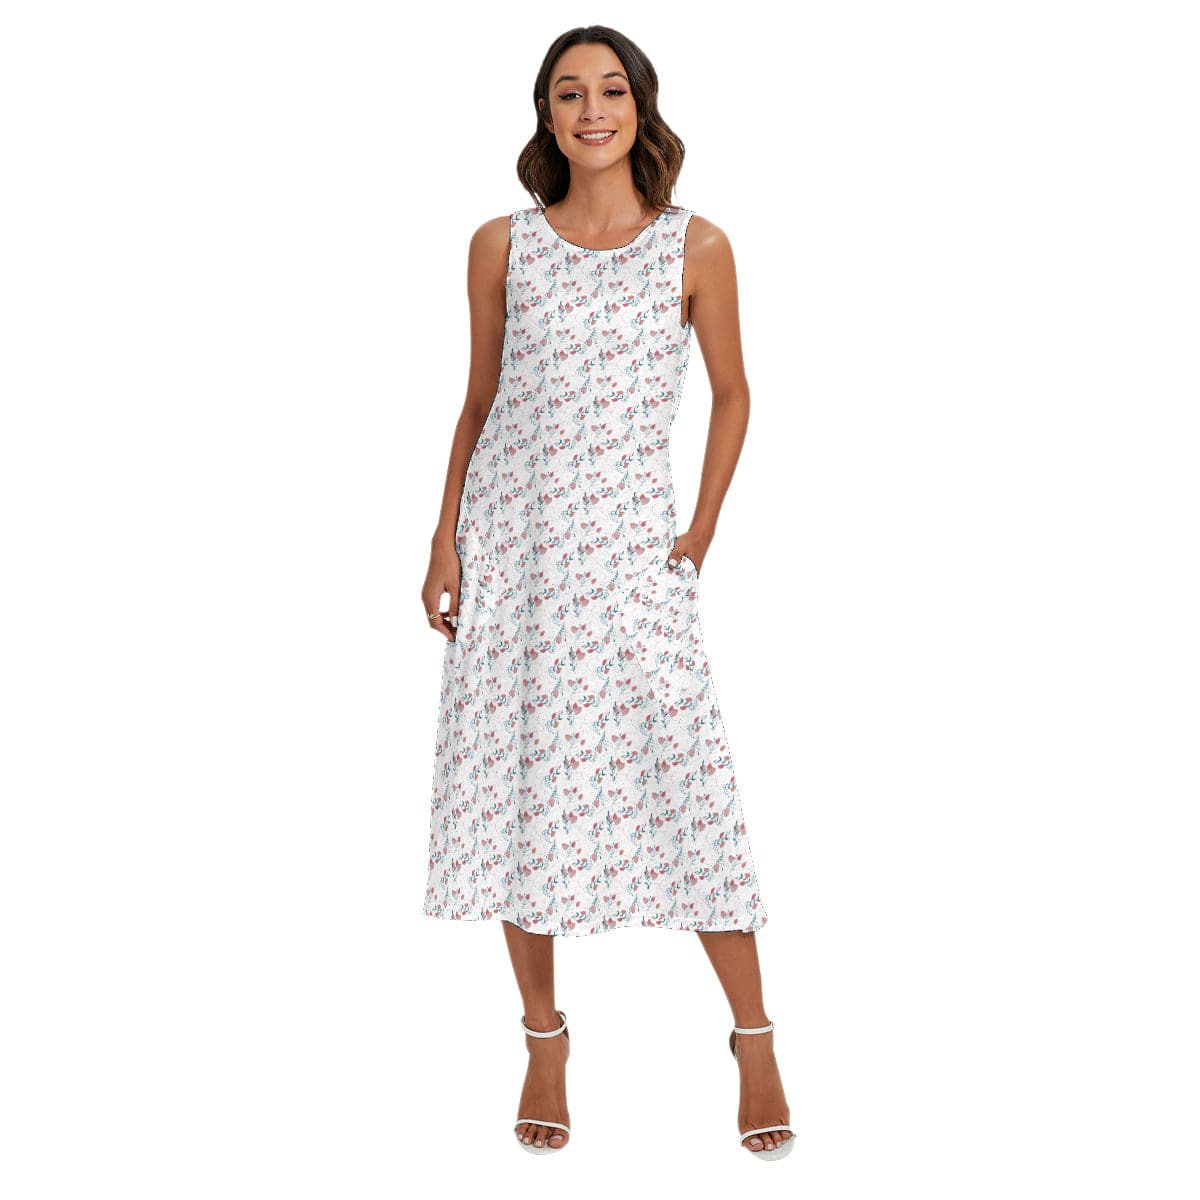 White with flowers patterned Women's Easy going Sleeveless Dress With Diagonal Pocket, by Sensus Stu